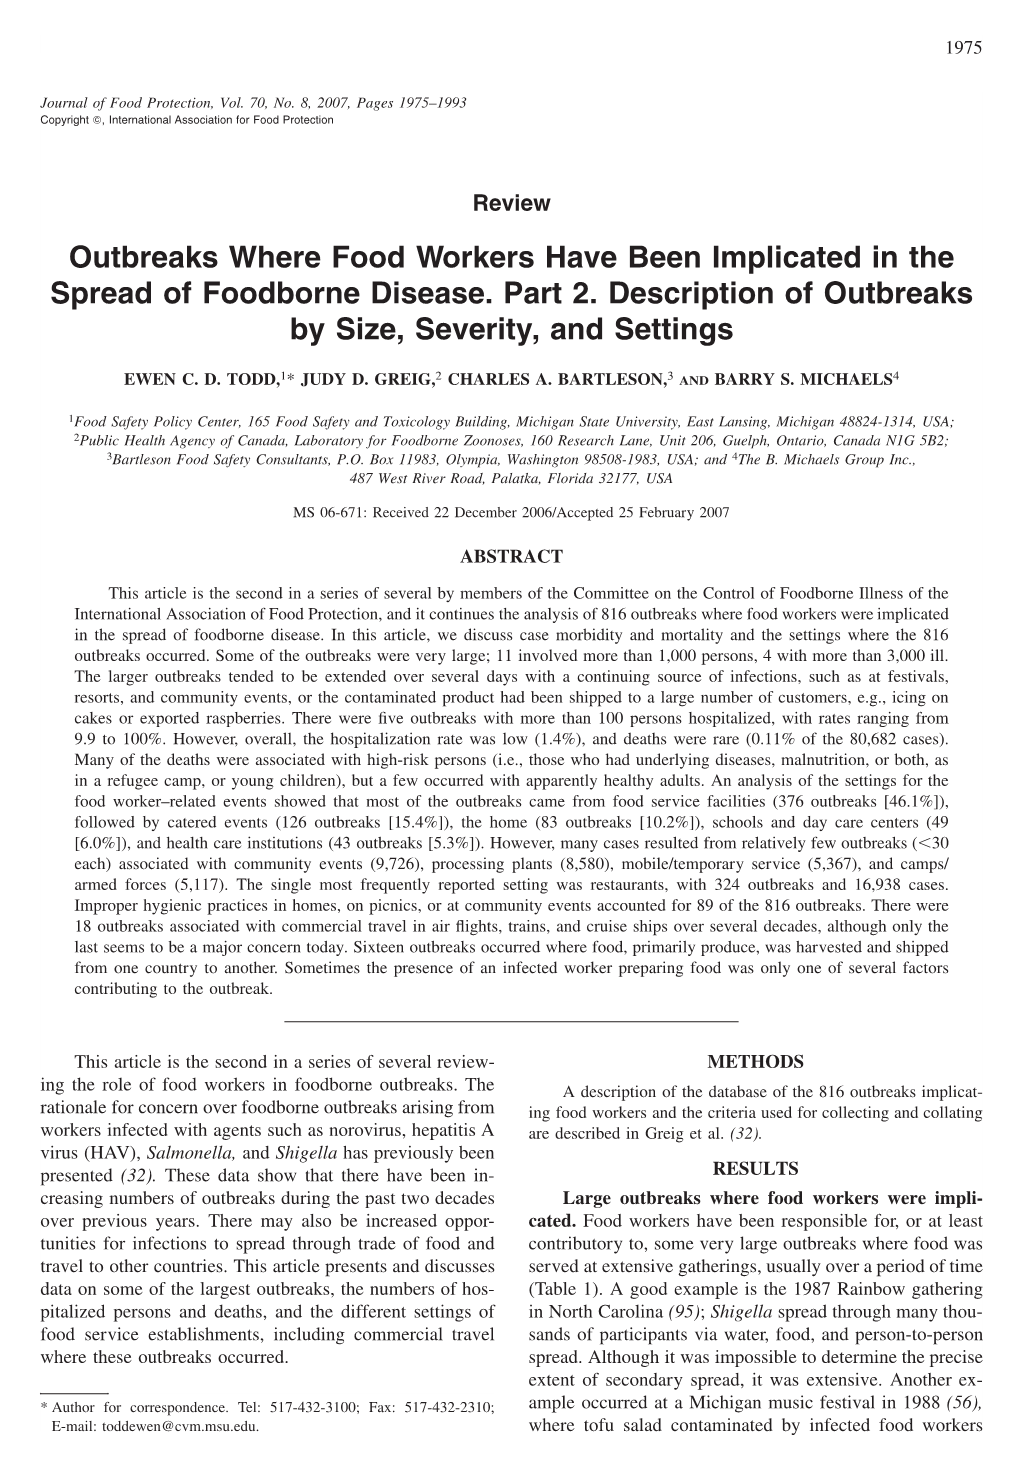 Outbreaks Where Food Workers Have Been Implicated in the Spread of Foodborne Disease